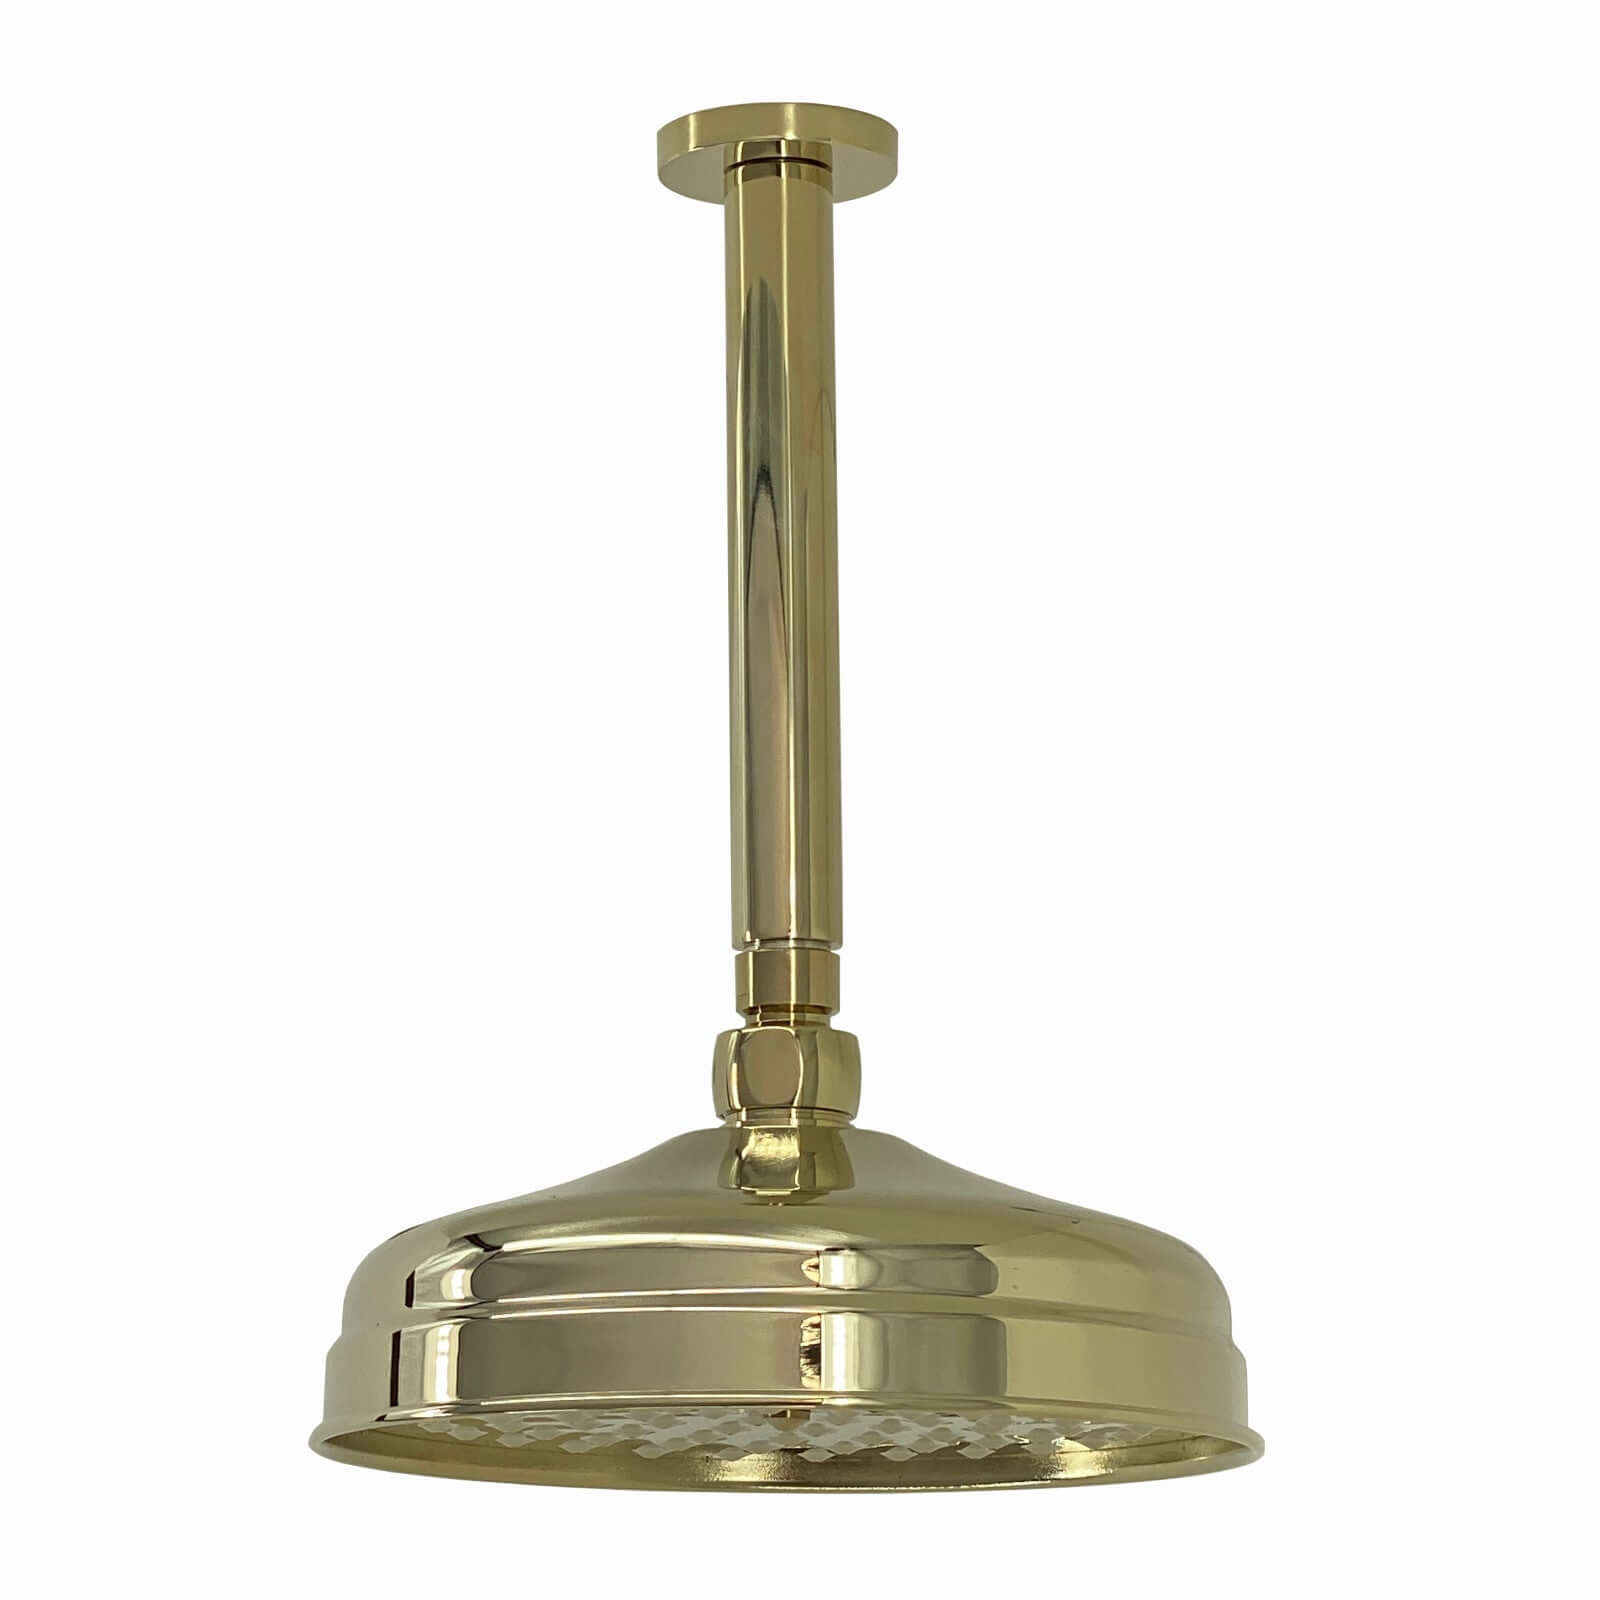 SH0261-03-RA050-01-traditional-ceiling-fixed-apron-brass-shower-head-8-with-180mm-ceiling-shower-arm-english-gold